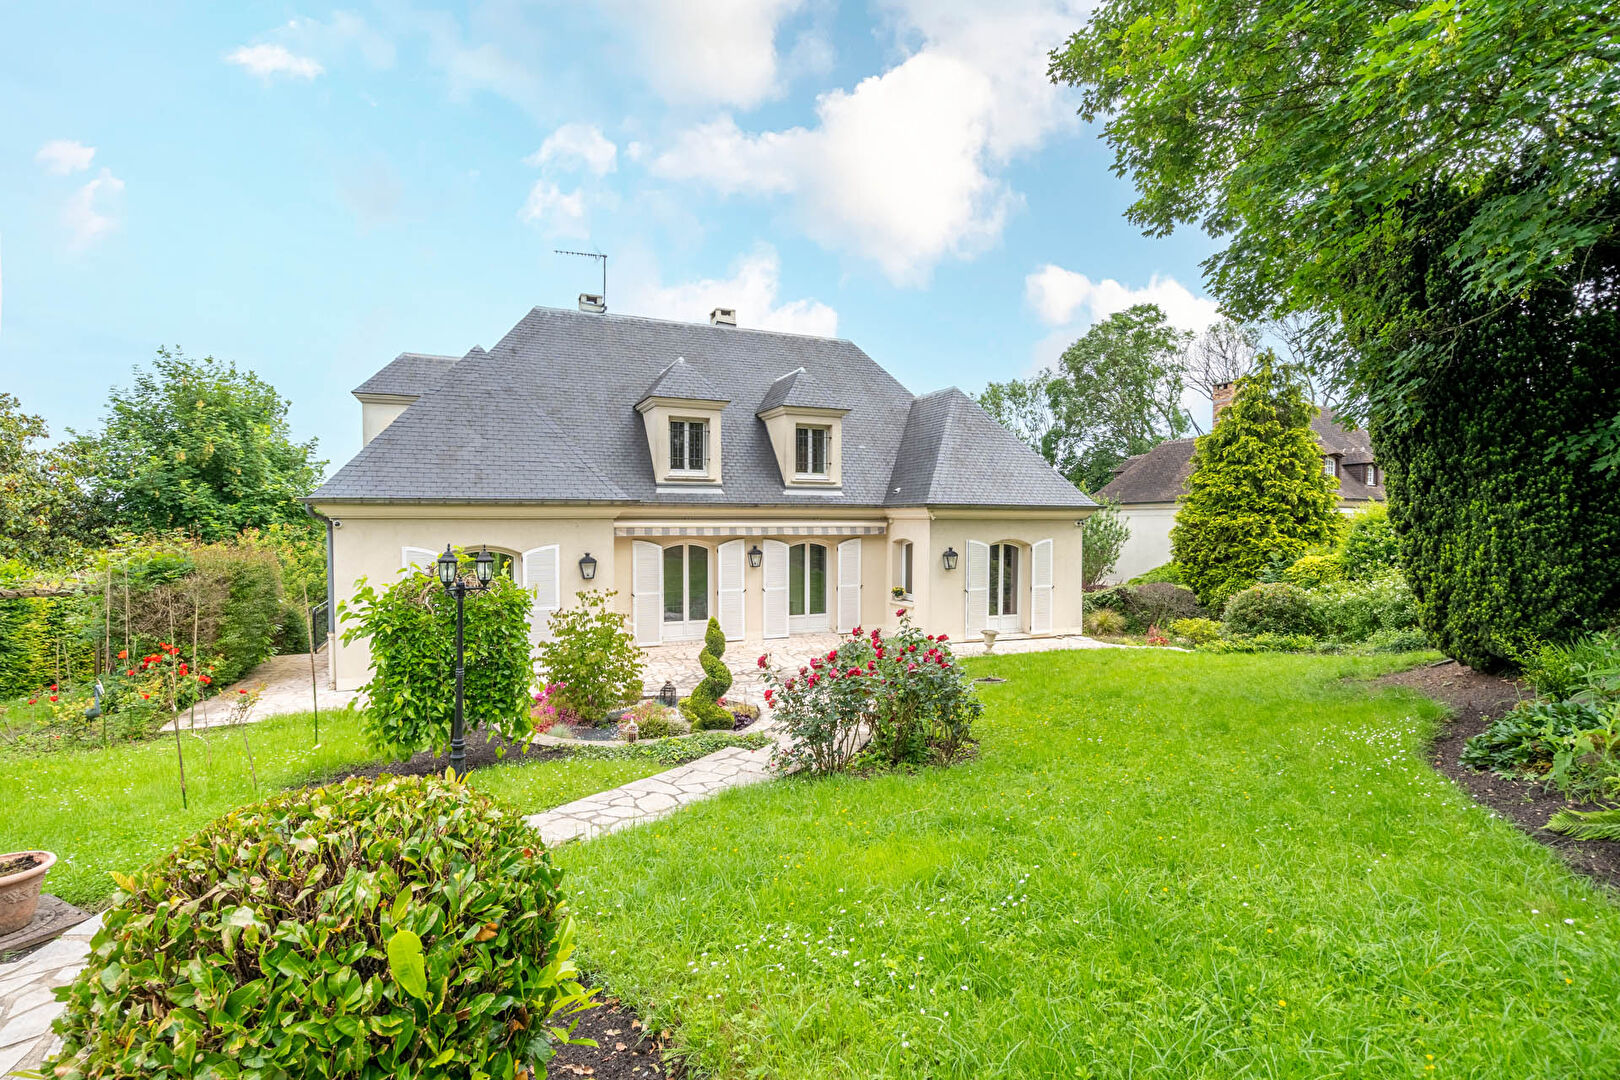 Bourgeois house with landscaped garden, near the banks of the Marne